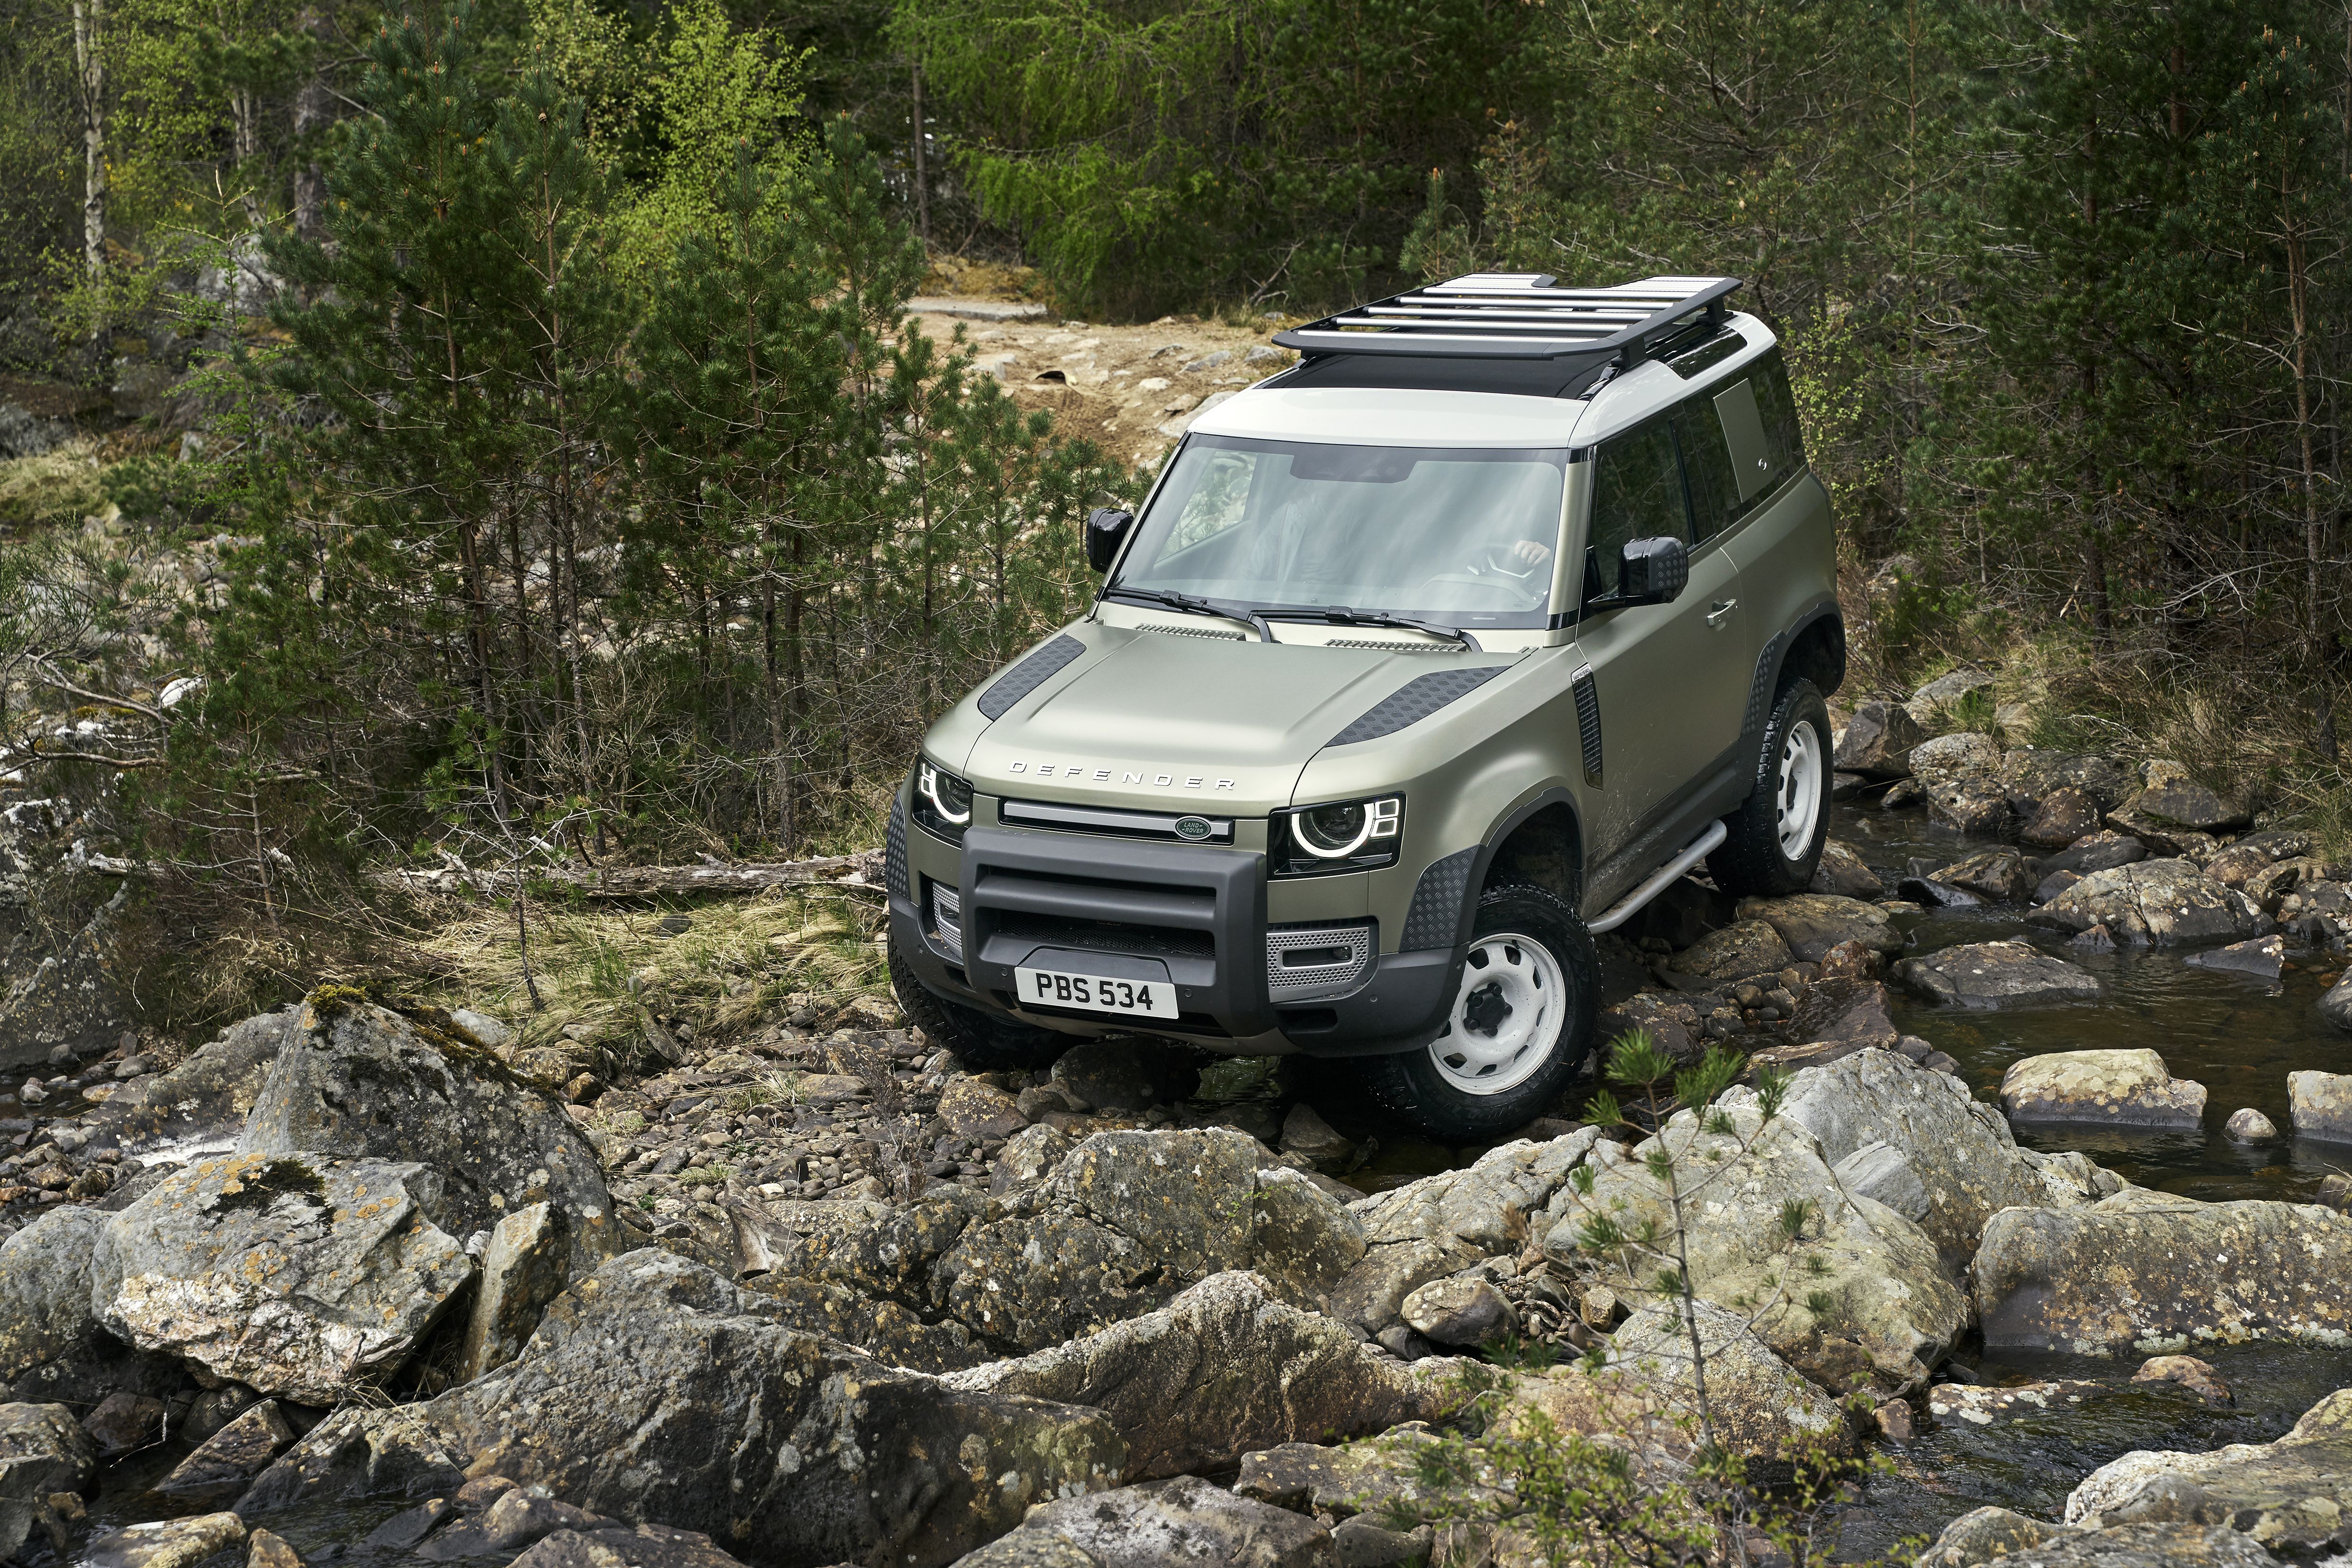 OVERVIEW: INTRODUCING THE NEW LAND ROVER DEFENDER. Land Rover